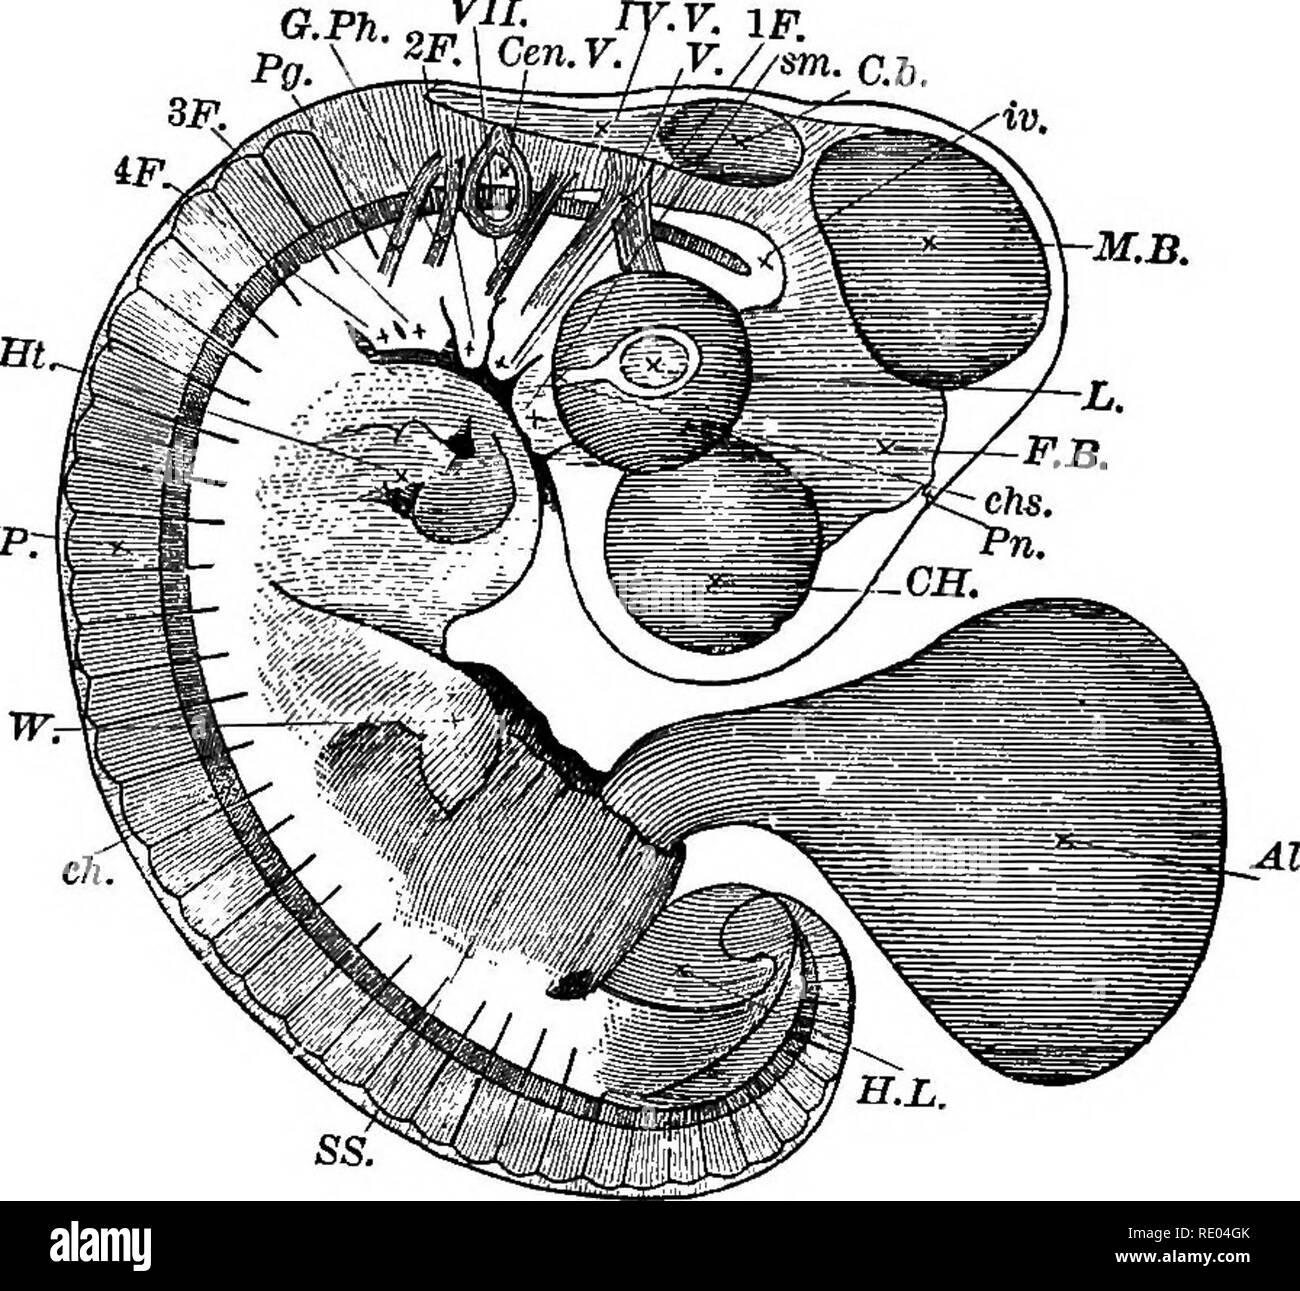 . A text-book of comparative physiology for students and practitioners of comparative (veterinary) medicine. Physiology, Comparative. 108 COMPARATIVE PHYSIOLOGY. An examination of the figures and subjoined descriptions must suffice to convey a general notion of the subsequent prog- yji. MP:. Fig. 114.—Embryo at end of fourth day, seen as a transparent object (Foster and Balfour). CH, cerebral hemisphere; F. B, fore-brain, or vesicle of third ventricle (thalamencephalon), with pineal eland (Pn) projecting; M. B, mid-brain; C.b, cerebellum; IV. V, fourth ventricle; L, lens; chs, choroid slit; Ce Stock Photo